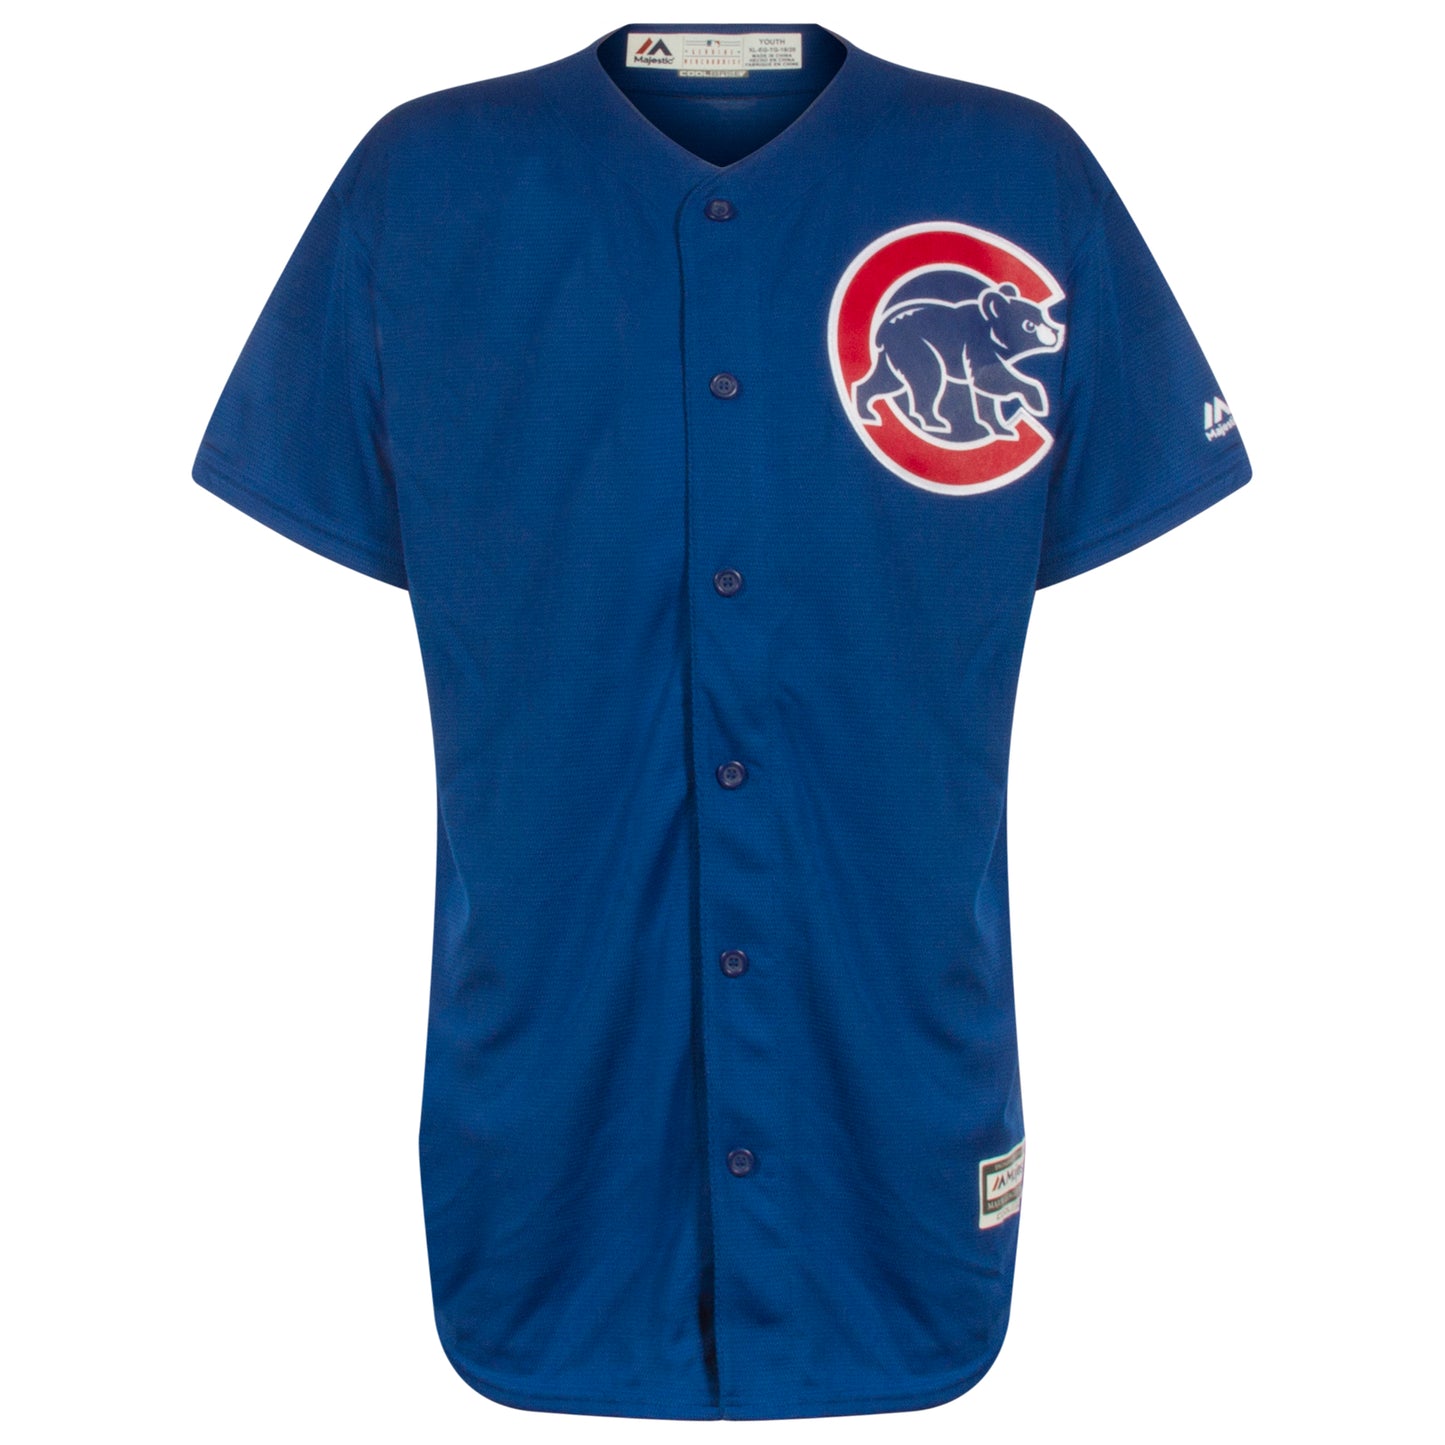 Chicago Cubs Youth Kyle Schwarber Alternate Blue Replica Jersey